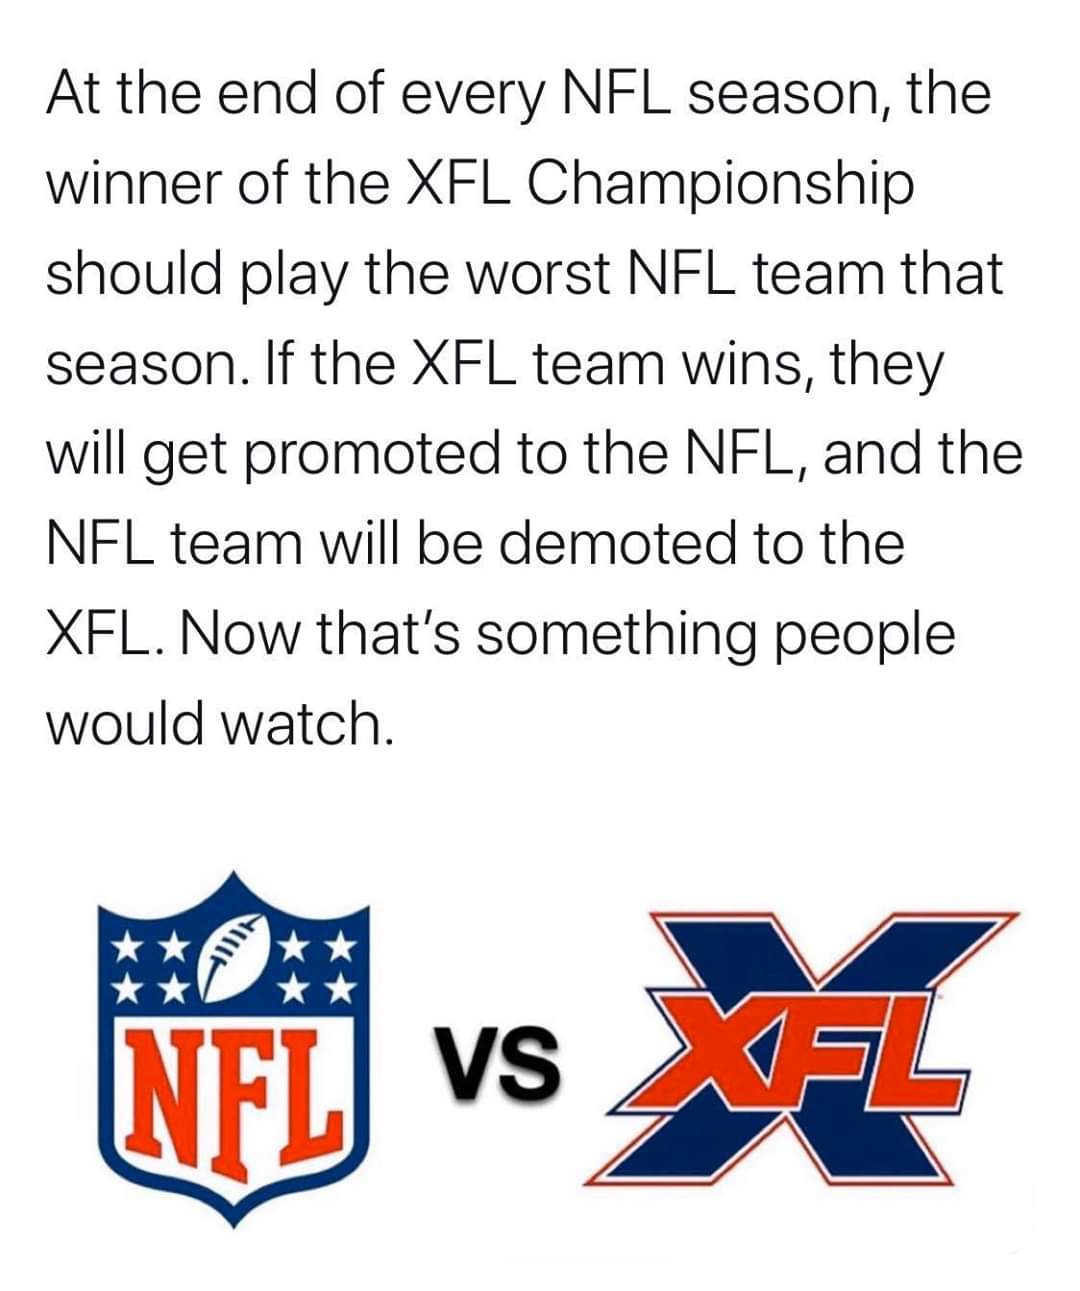 angle - At the end of every Nfl season, the winner of the Xfl Championship should play the worst Nfl team that season. If the Xfl team wins, they will get promoted to the Nfl, and the Nfl team will be demoted to the Xfl. Now that's something people would 